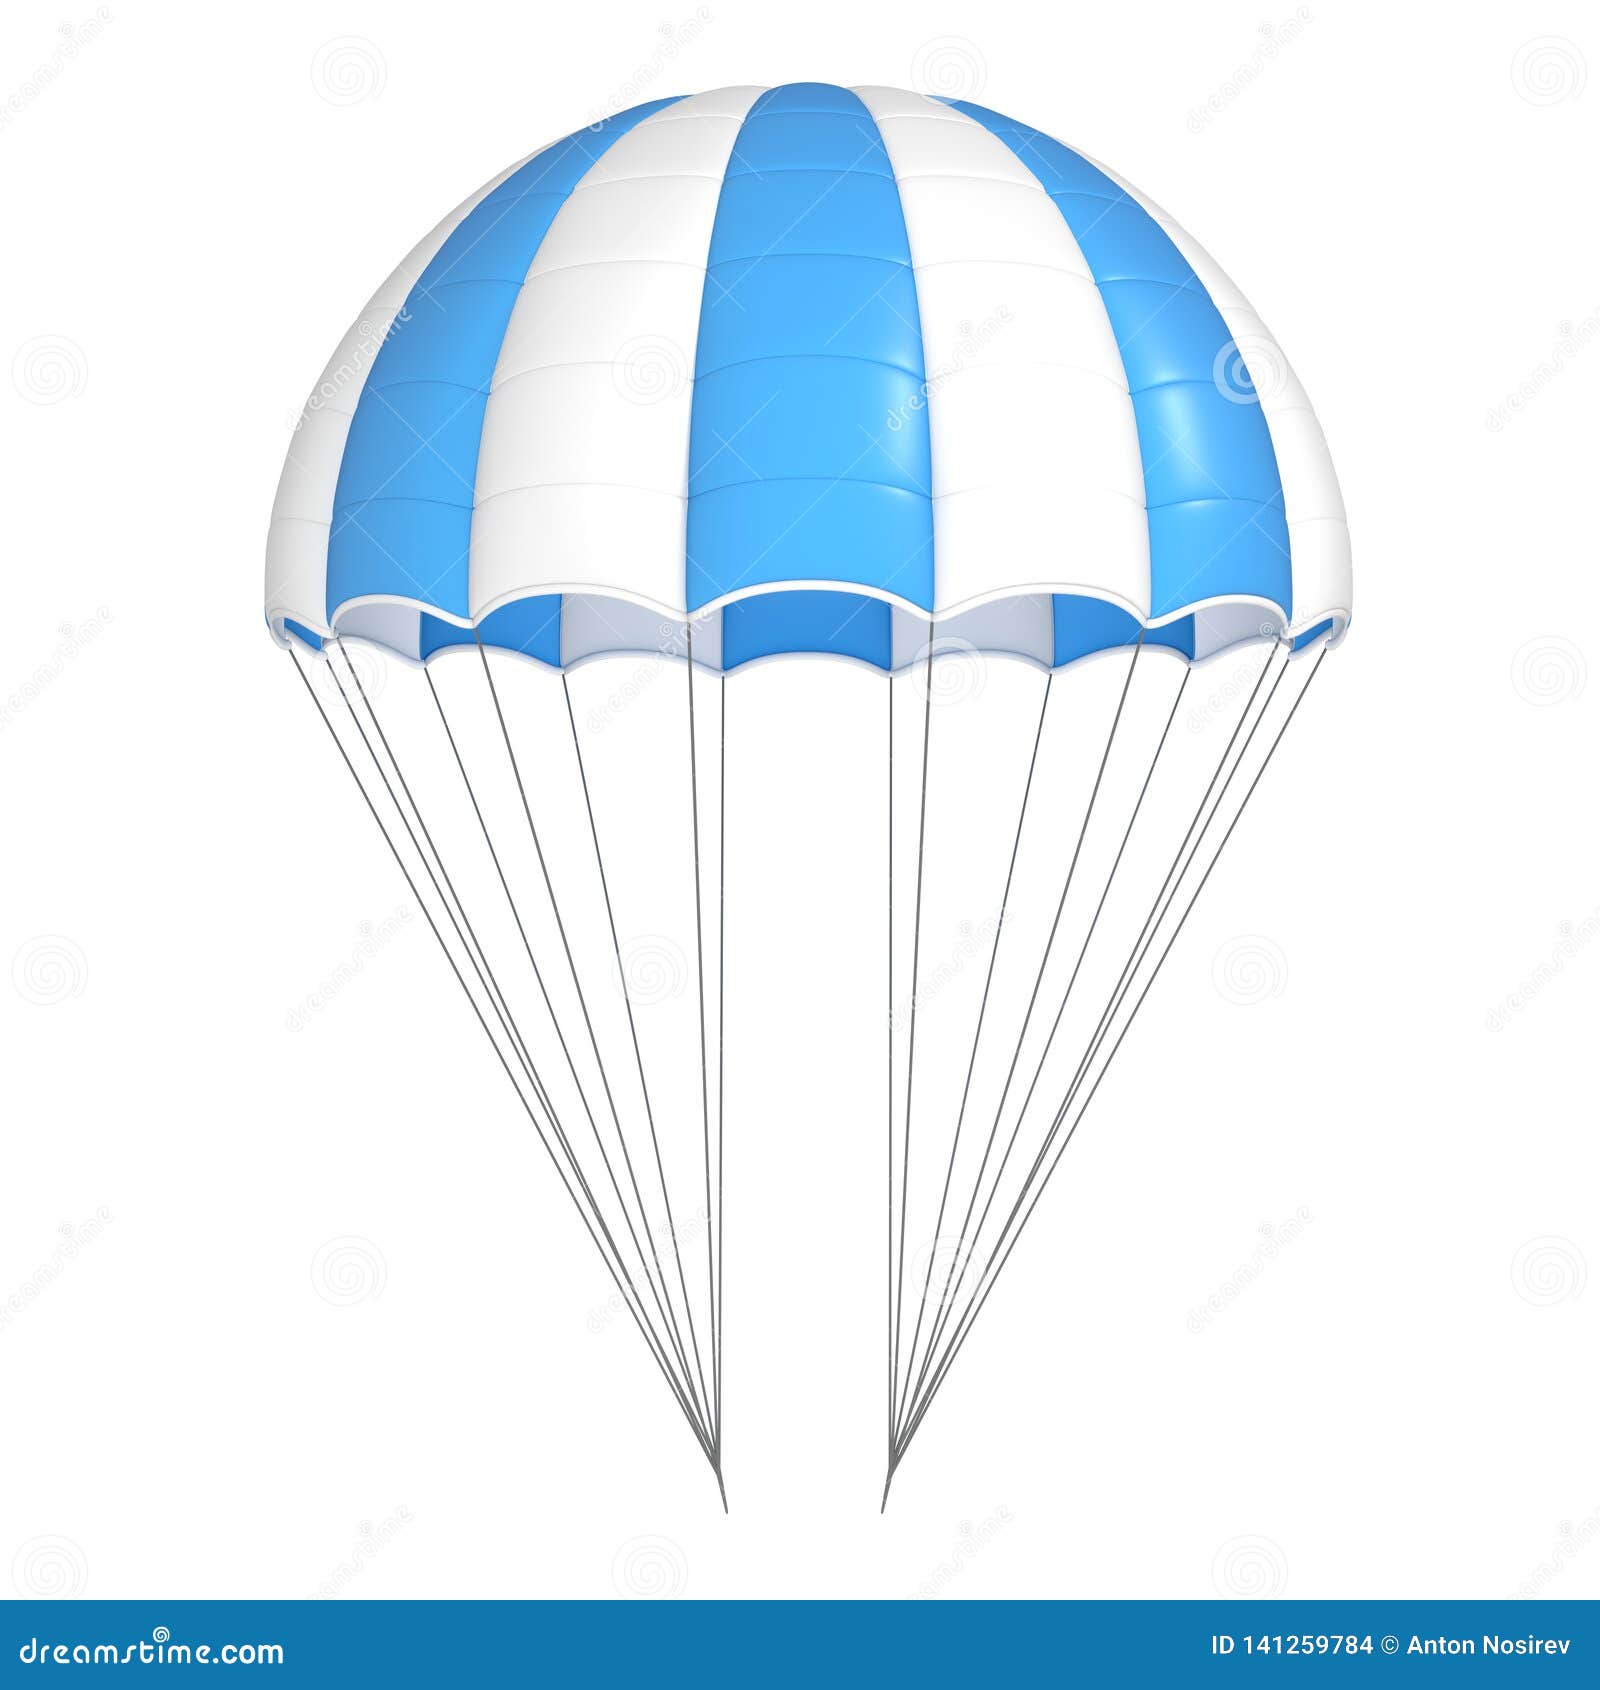 parachute, blie with white, striped.